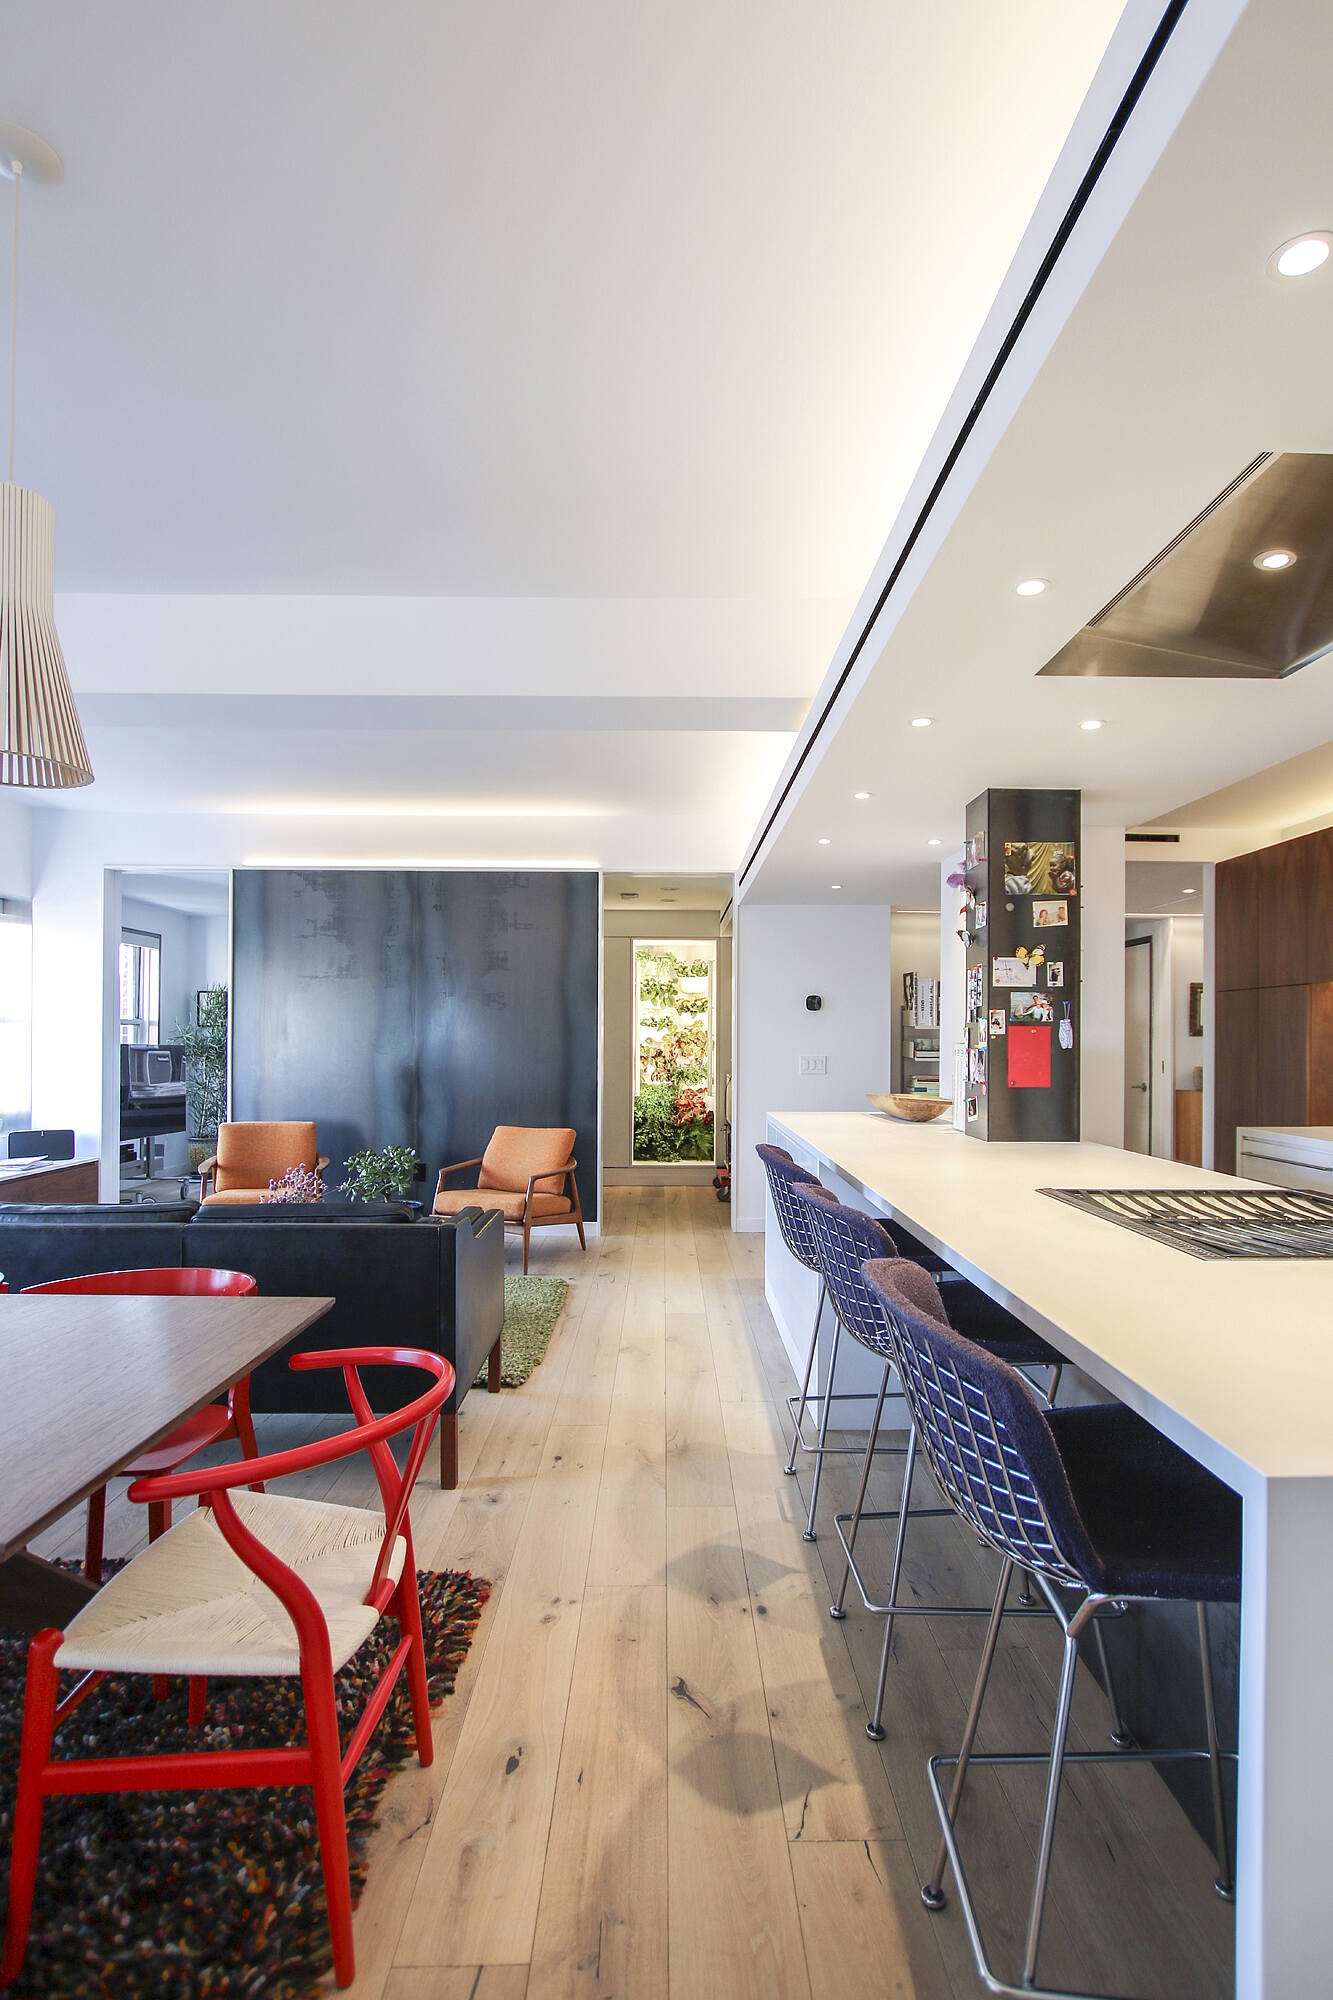 Willow Street Apartment by Resolution: 4 Architecture